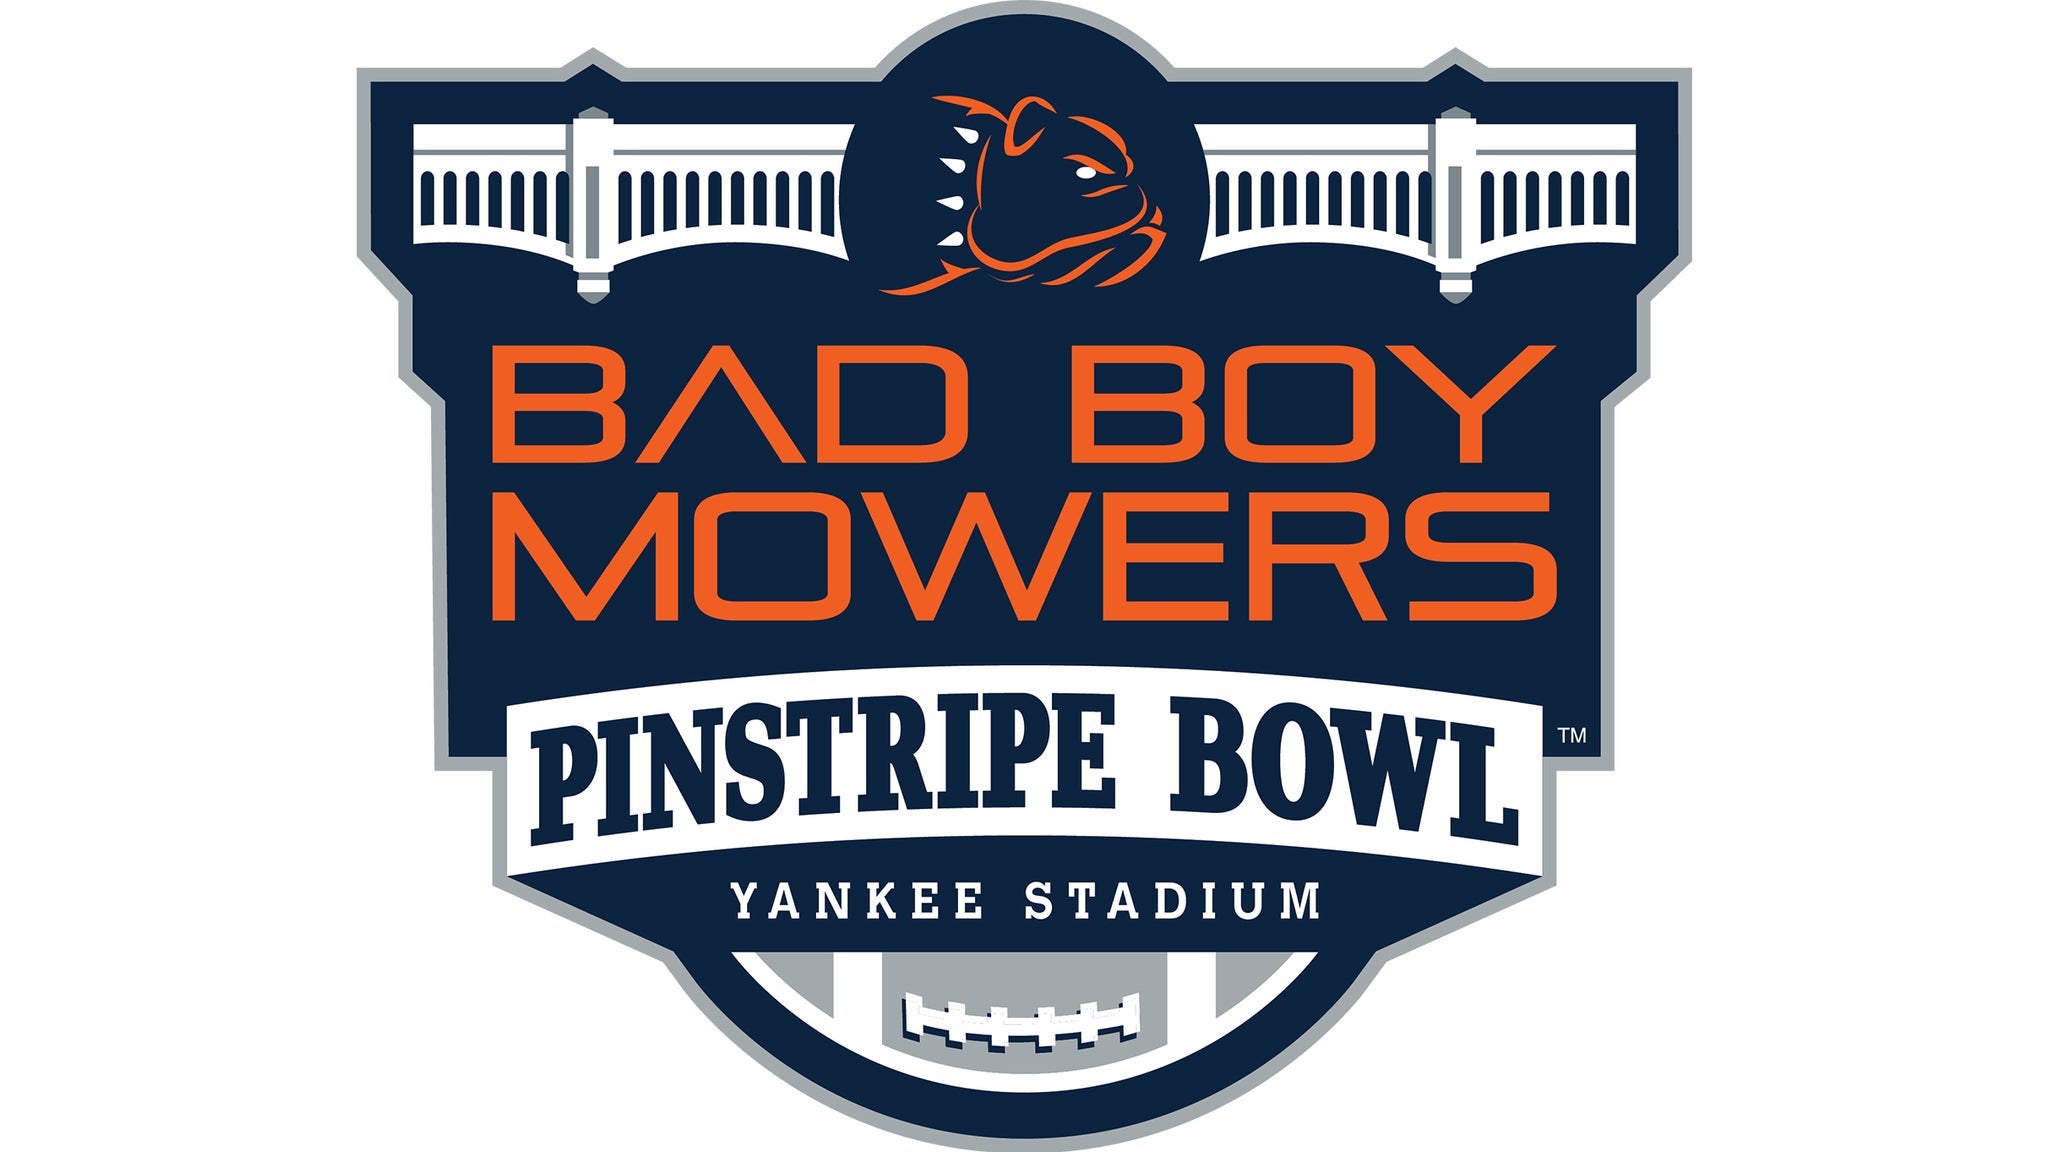 Bad Boy Mowers Pinstripe Bowl in Bronx promo photo for 2 For 1 presale offer code